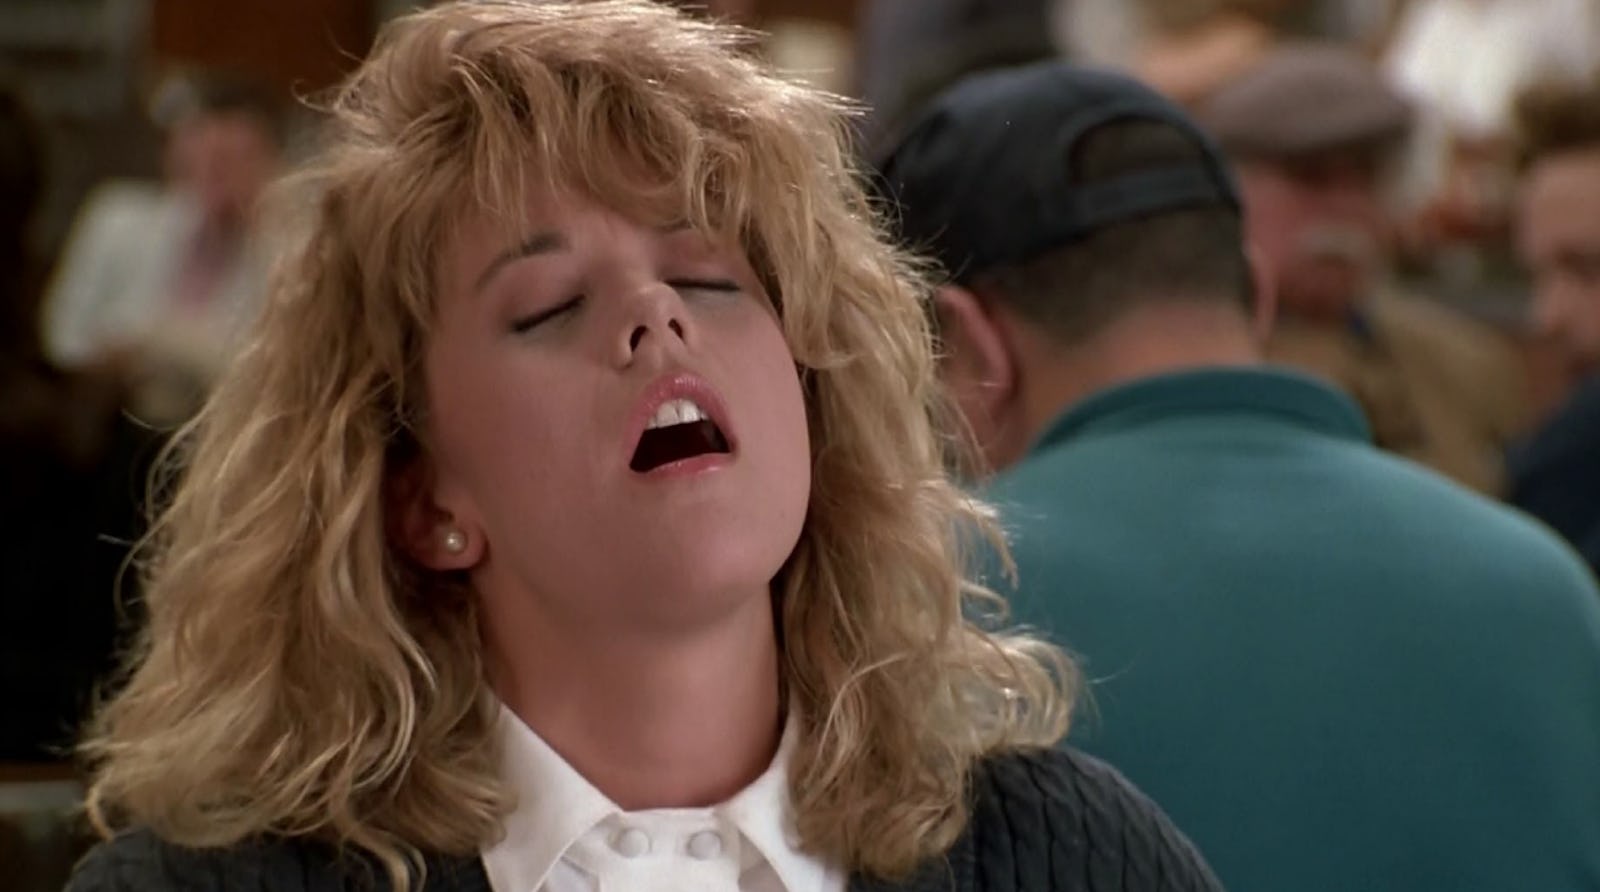 14 Old Euphemisms For Orgasms Because Everybody Deserves To Have Their